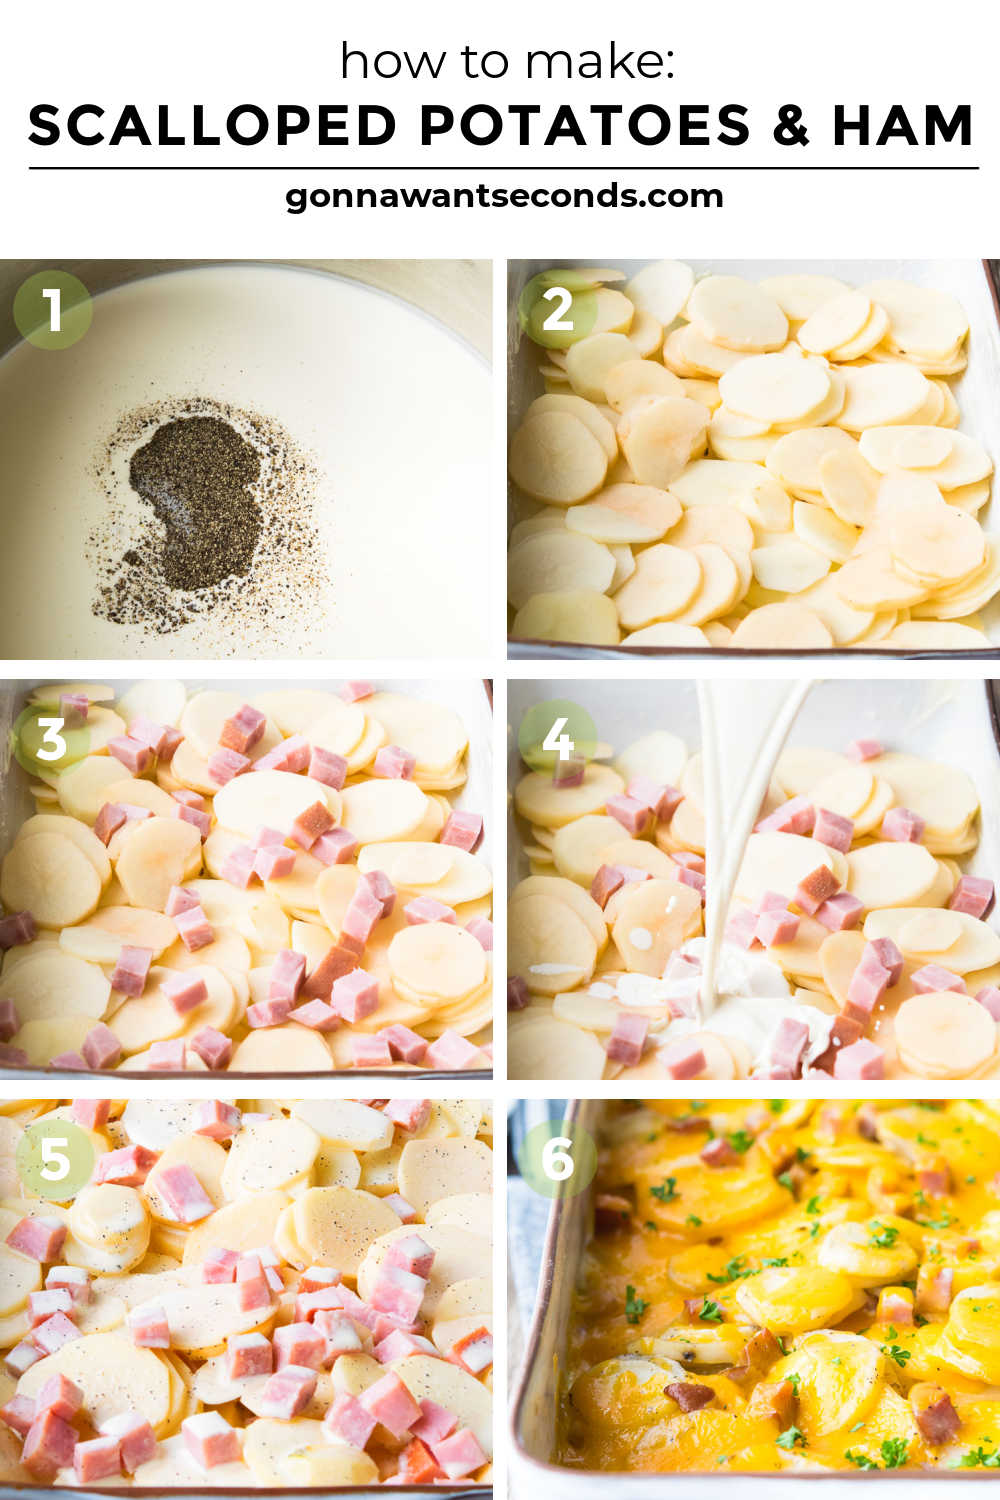 step by step how to make scalloped potatoes and ham